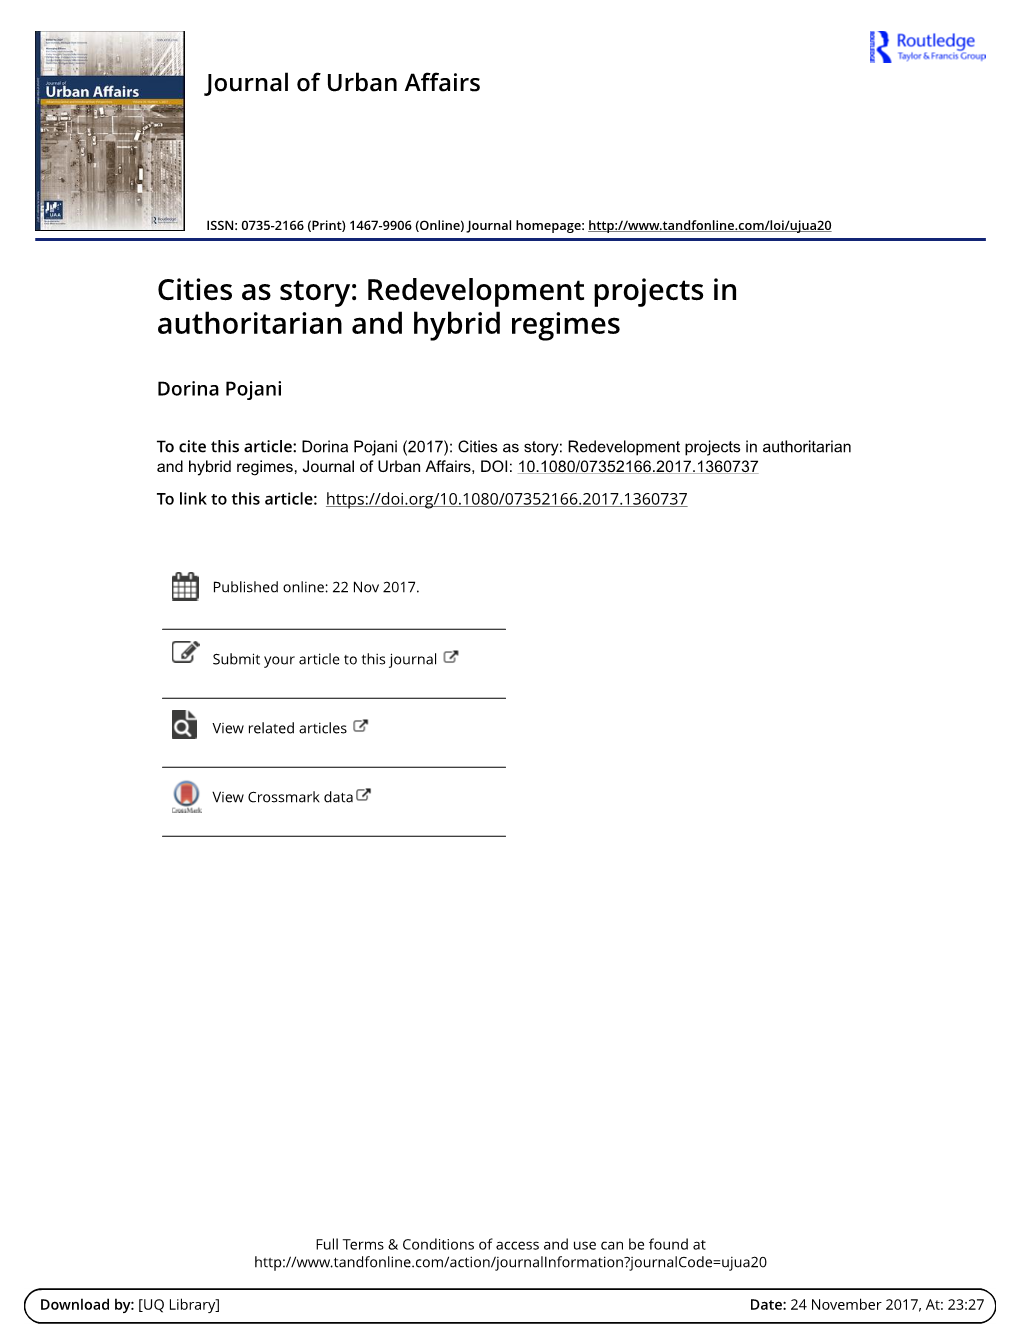 Redevelopment Projects in Authoritarian and Hybrid Regimes